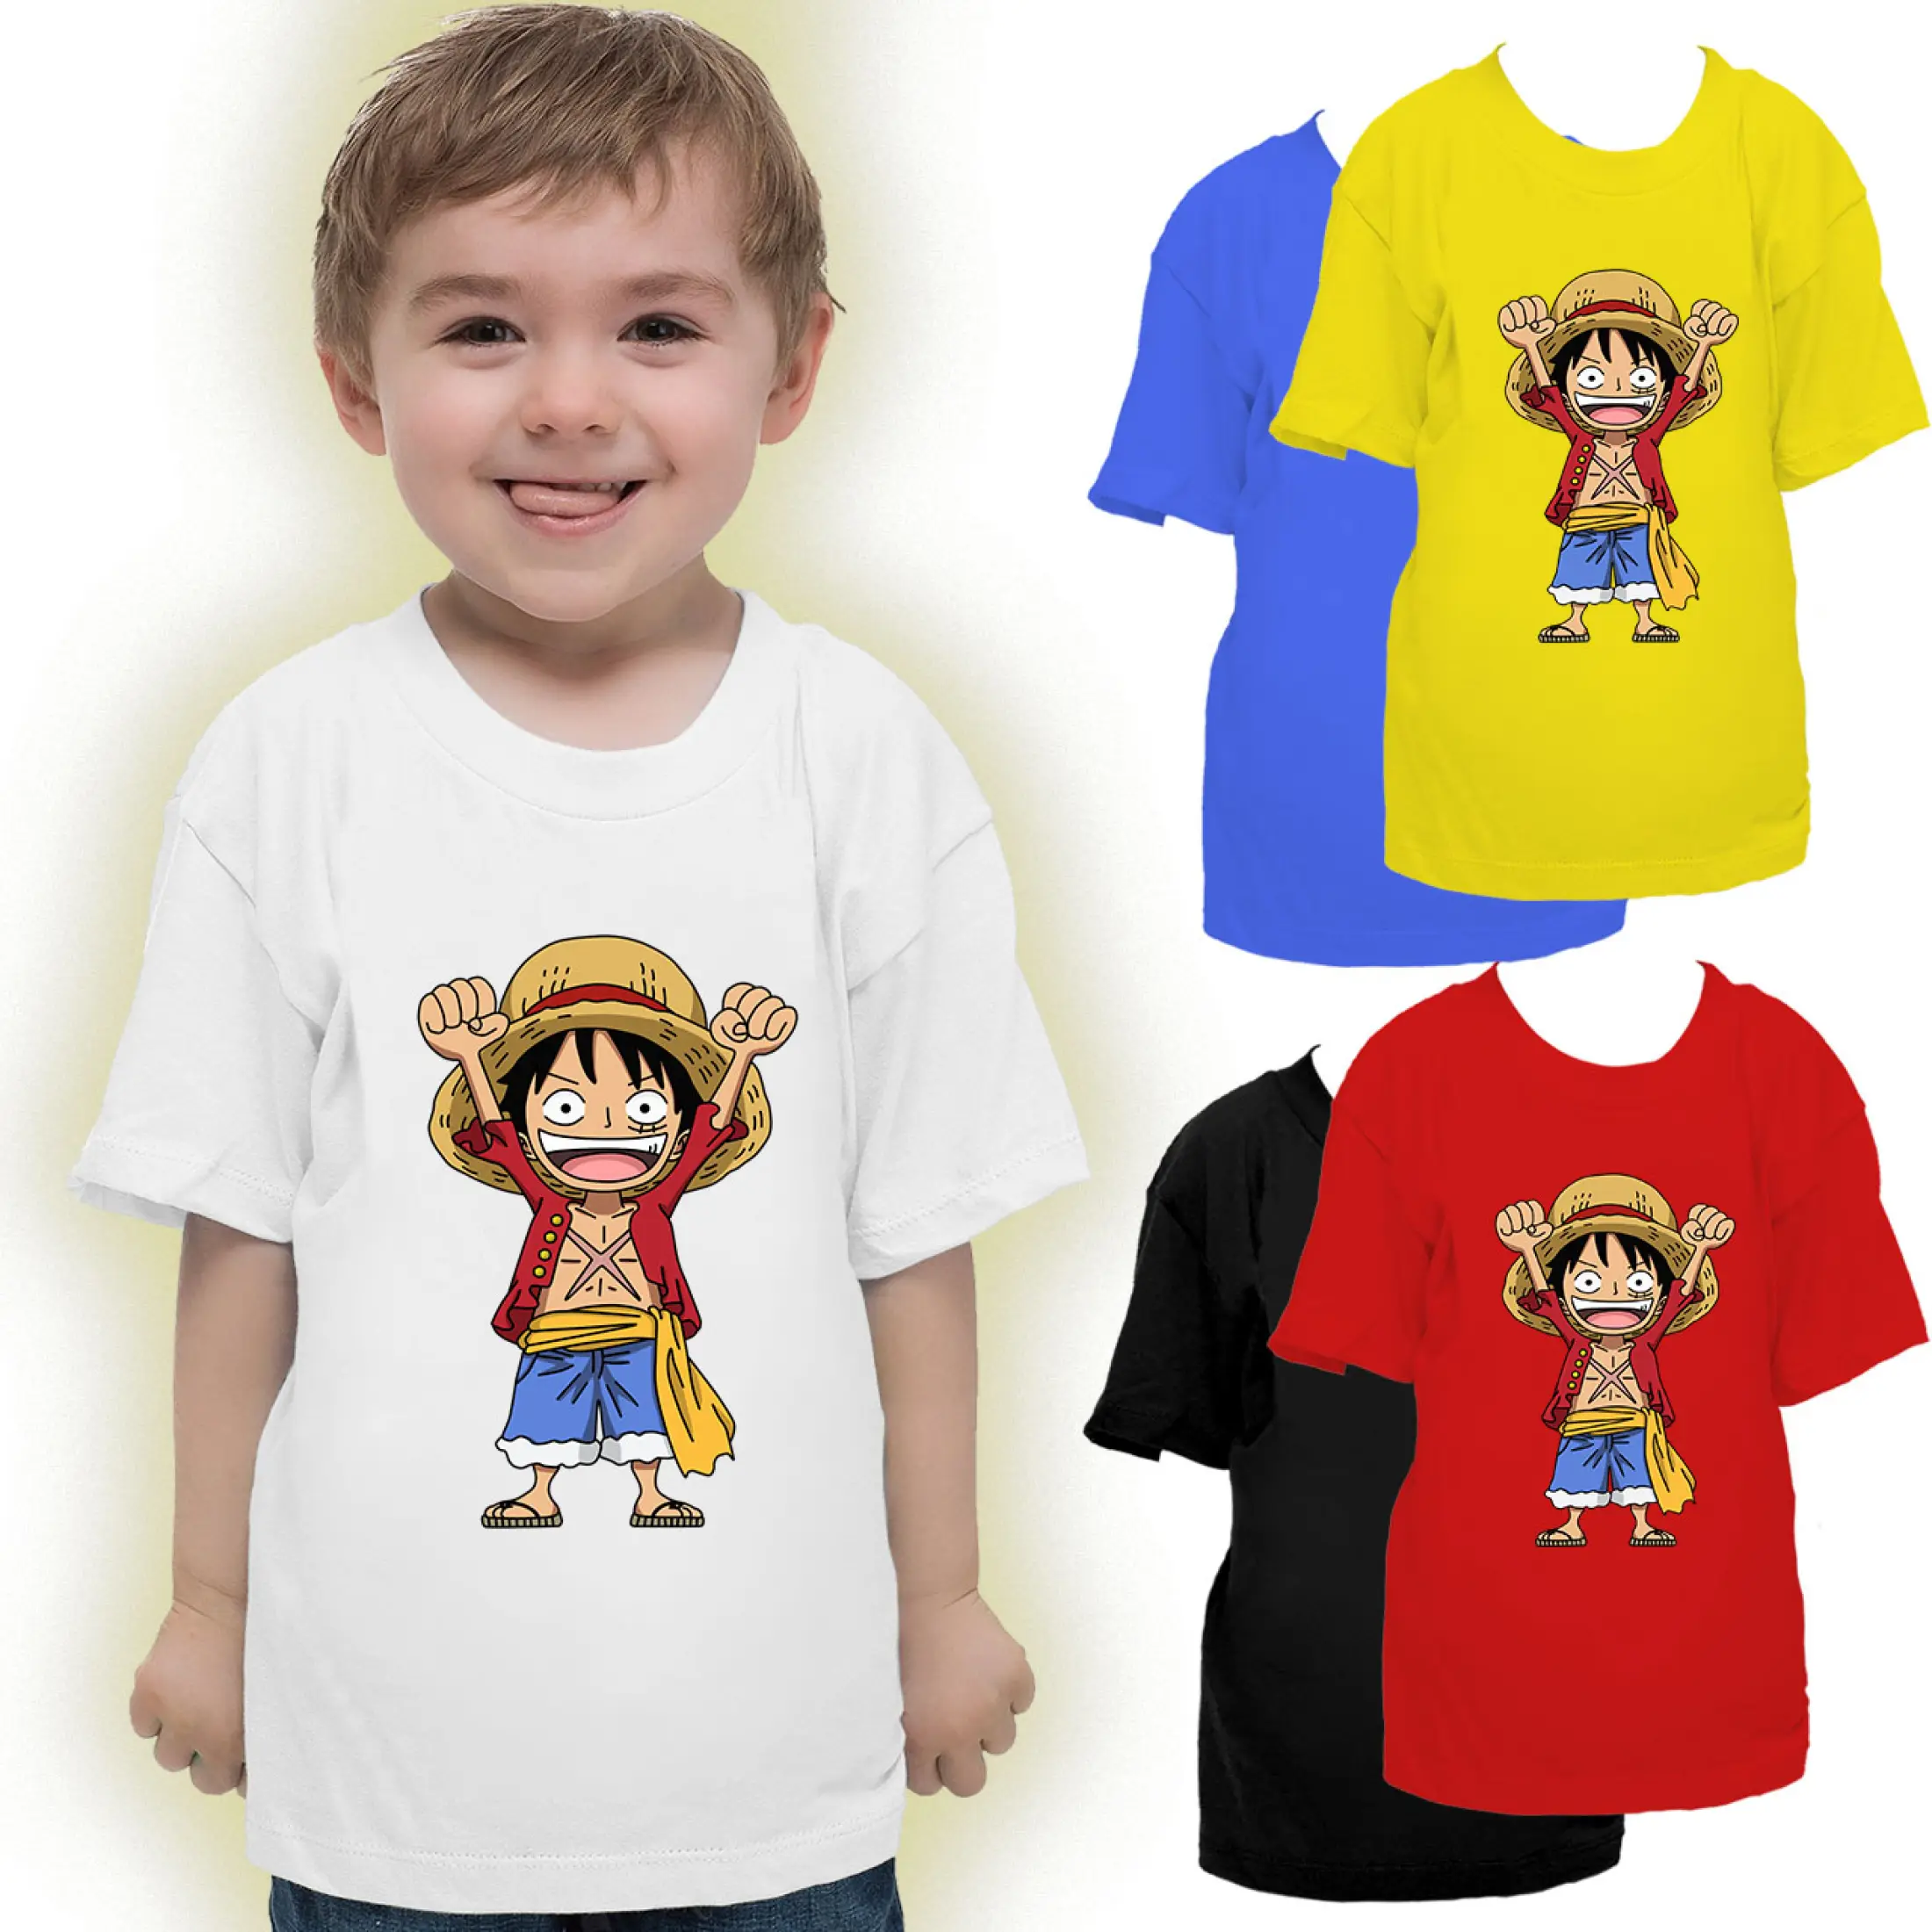 One Piece Monkey D Luffy Anime T Shirt For Kids And Teens Unisex Boys Girls Lazada Ph